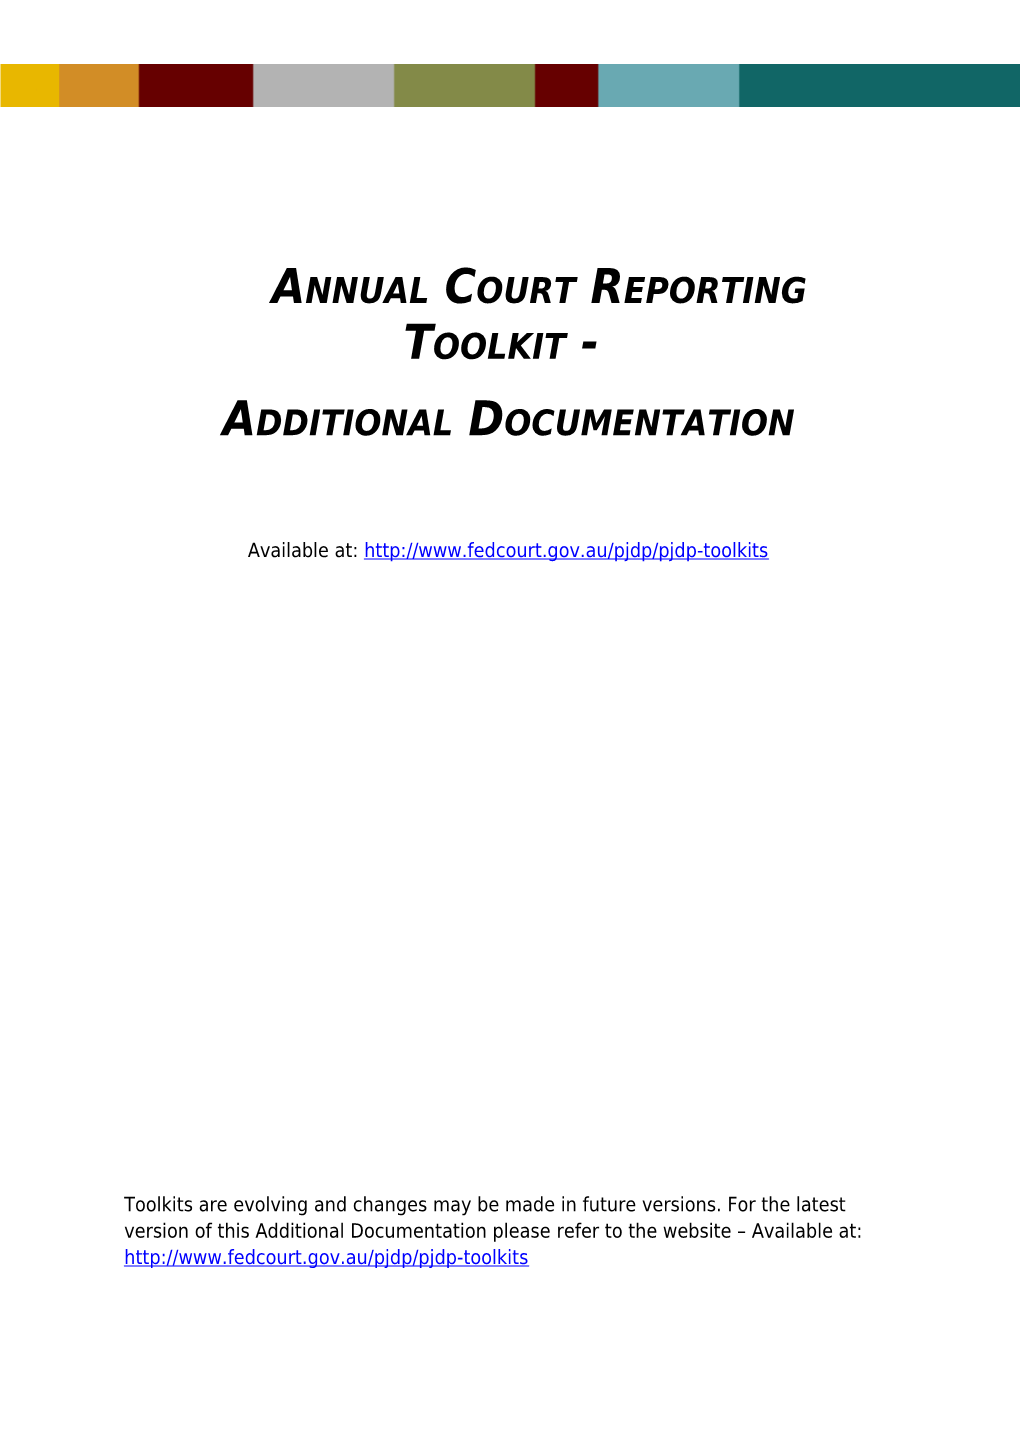 Annual Court Reporting Toolkit Annex 8